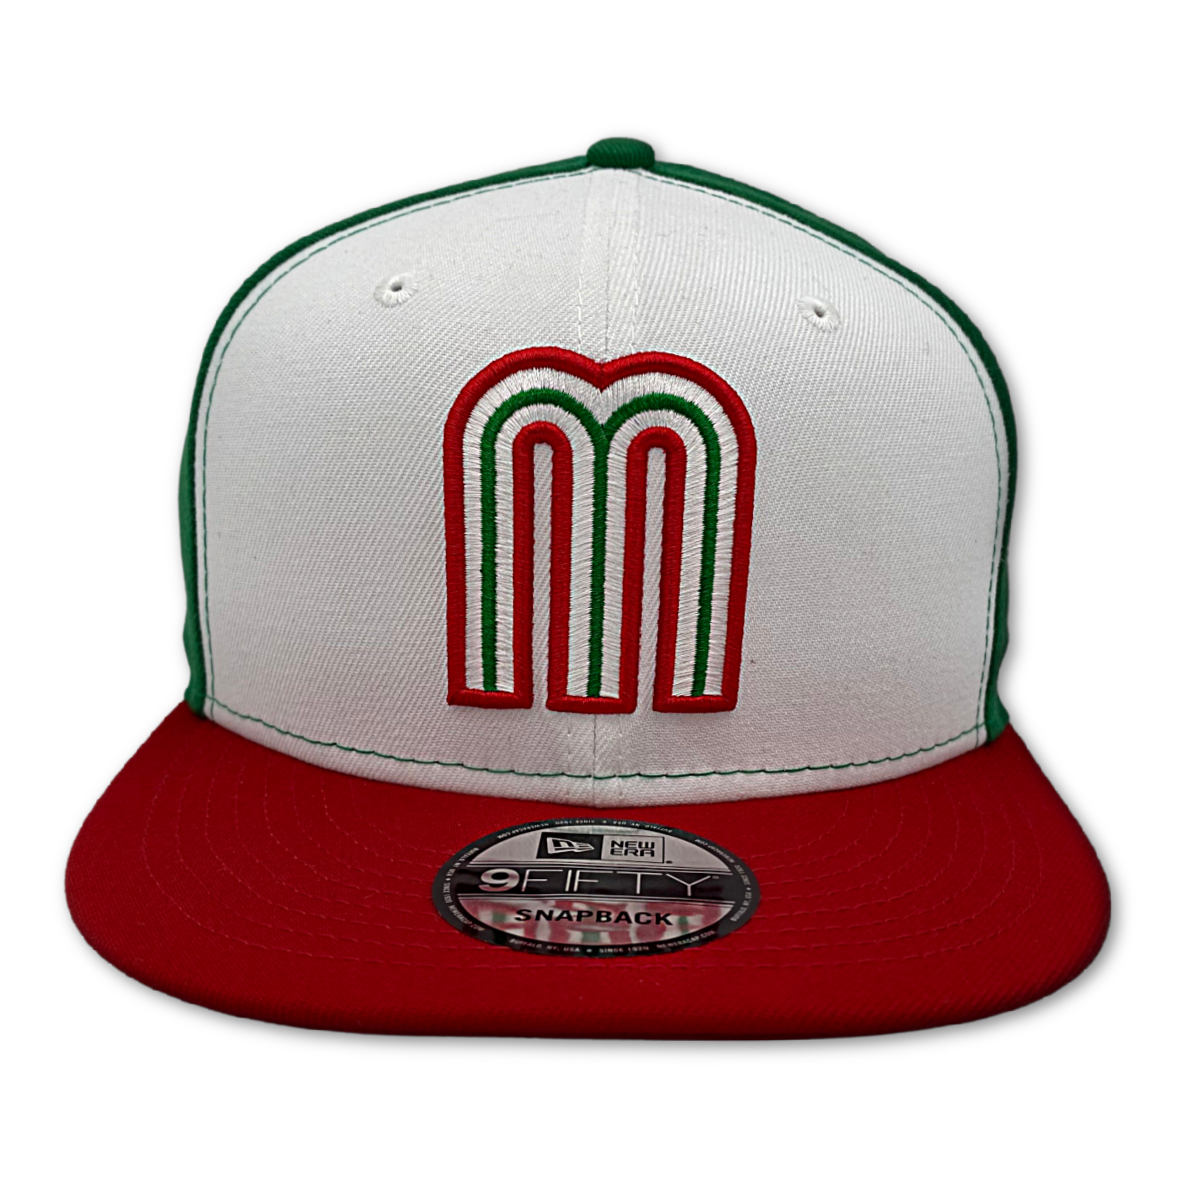 NEW ERA OFFICIAL WBC MEXICO TEAM TRI COLOR 9FIFTY FITTED HAT nvsoccer.com The Coliseum